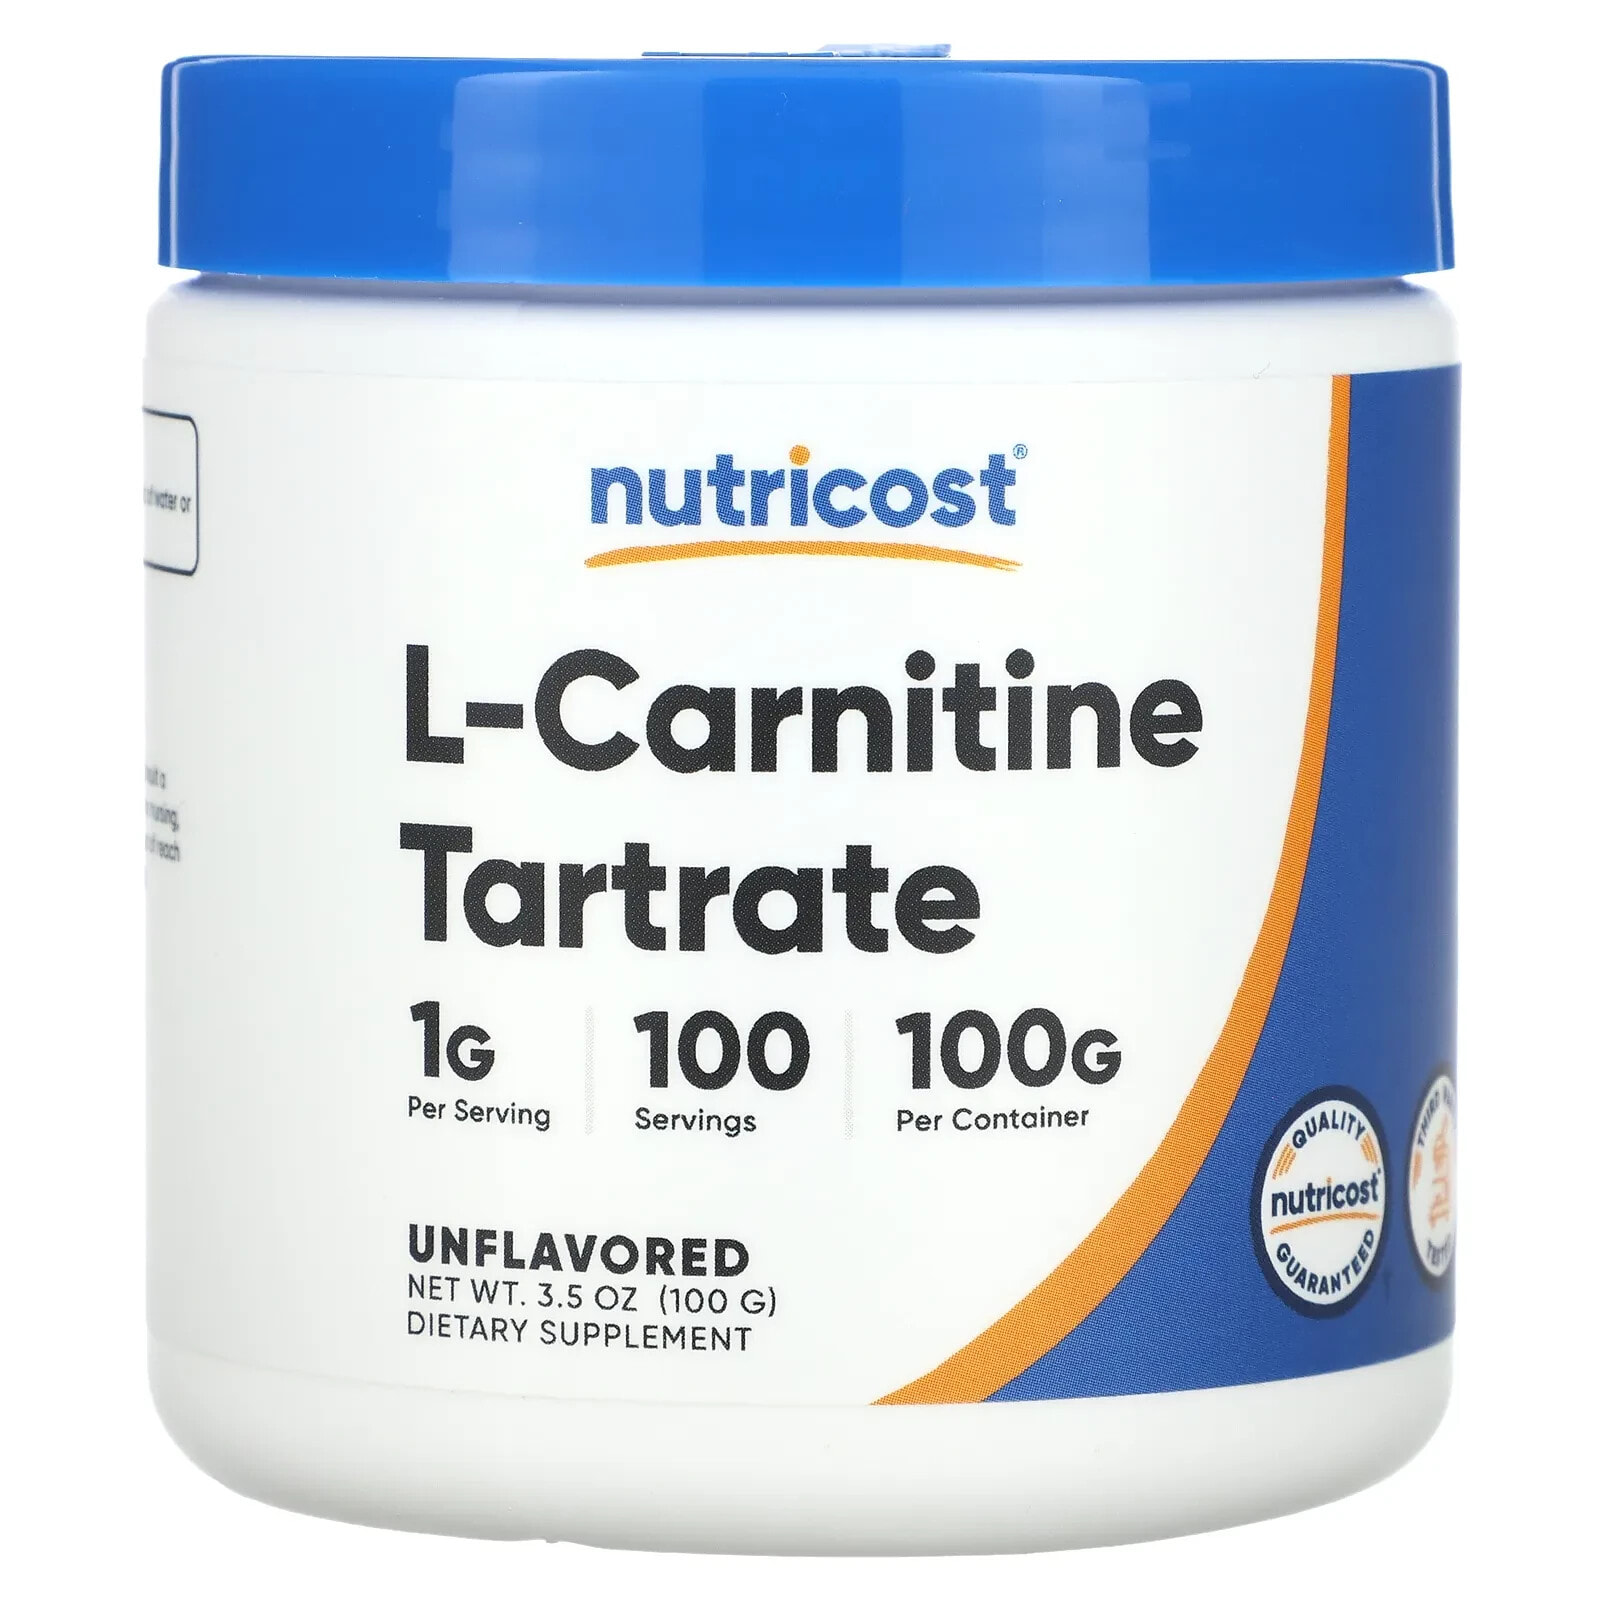 Nutricost, L-Carnitine Tartrate, Unflavored, 1 g, 8.8 oz (250 g)